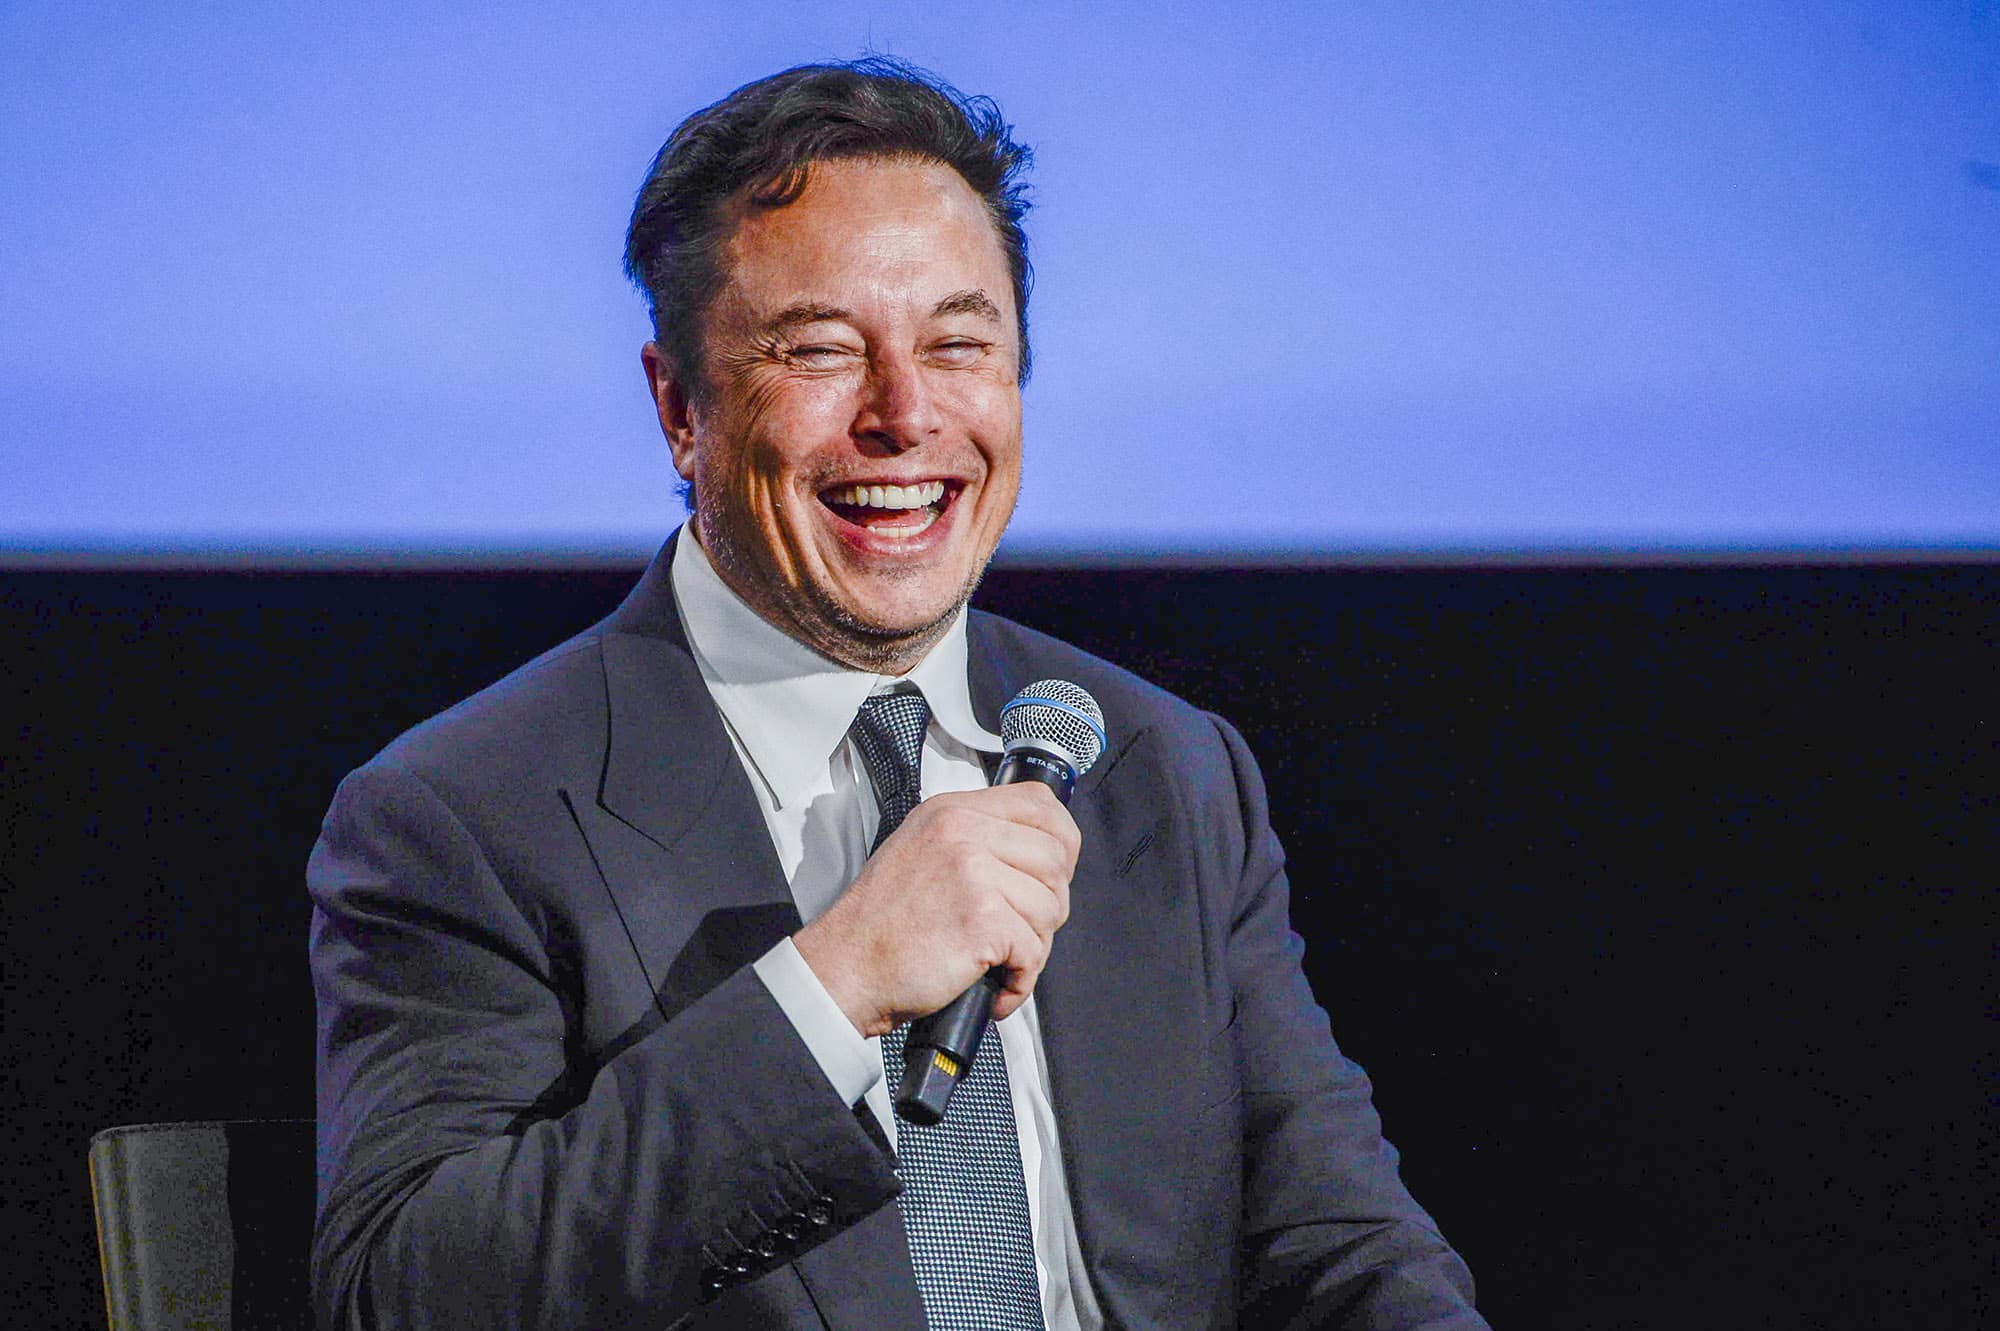 SPACESHIP CRASH! Elon Musk Becomes First Person To Lose $200 Billion of Wealth